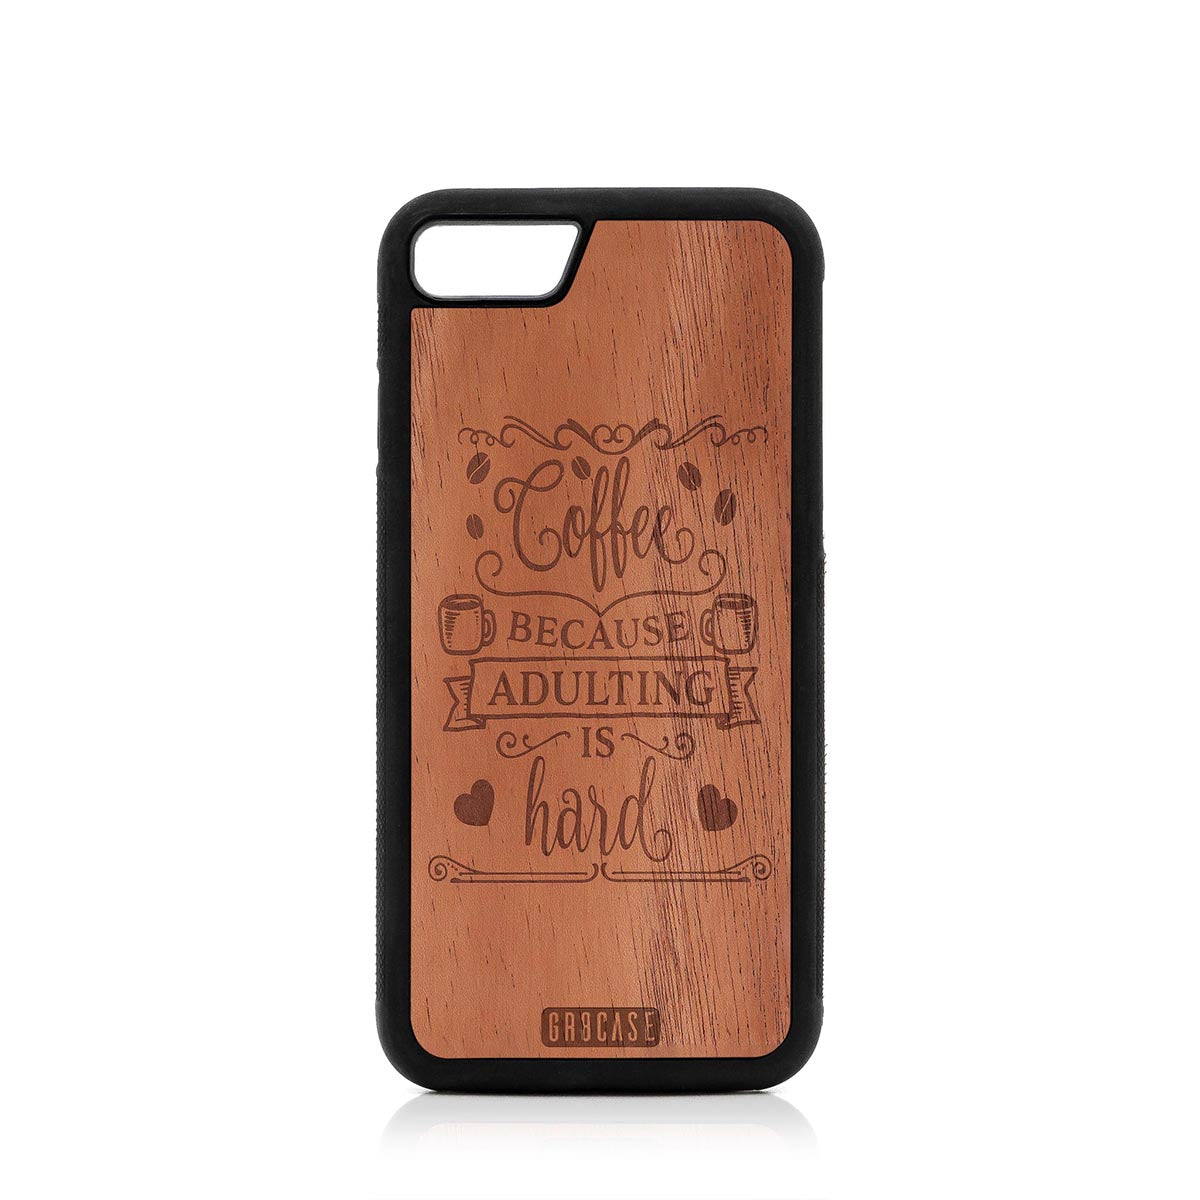 Coffee Because Adulting Is Hard Design Wood Case For iPhone 7/8 by GR8CASE